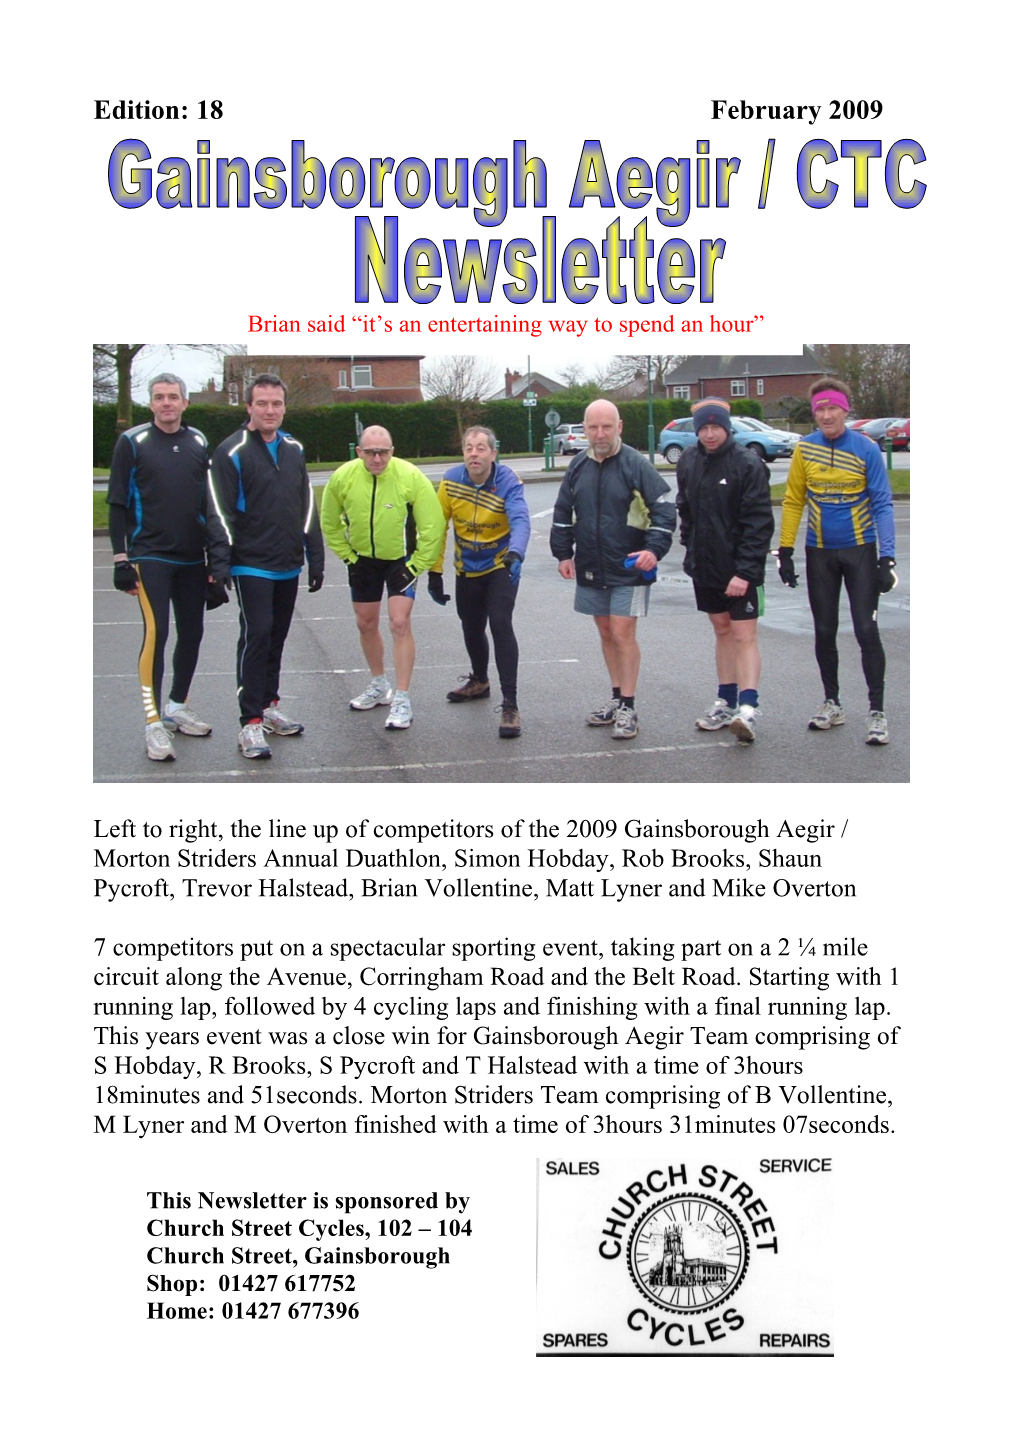 Left to Right, the Line up of Competitors of the 2009 Gainsborough Aegir / Morton Striders